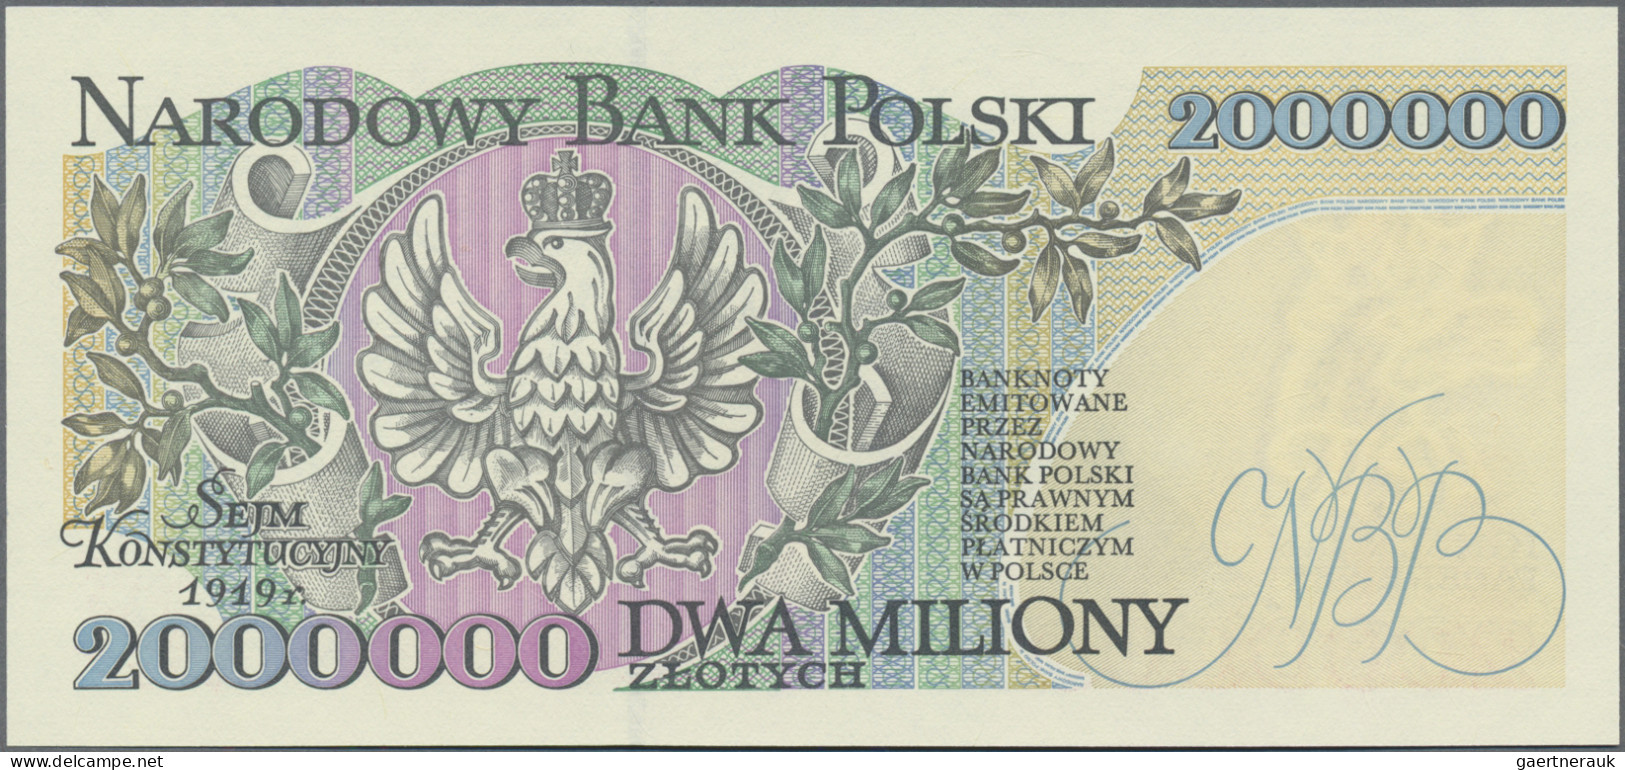 Poland - Bank Notes: Narodowy Bank Polski, Pair With 2 Million Zlotych 1993 And - Poland